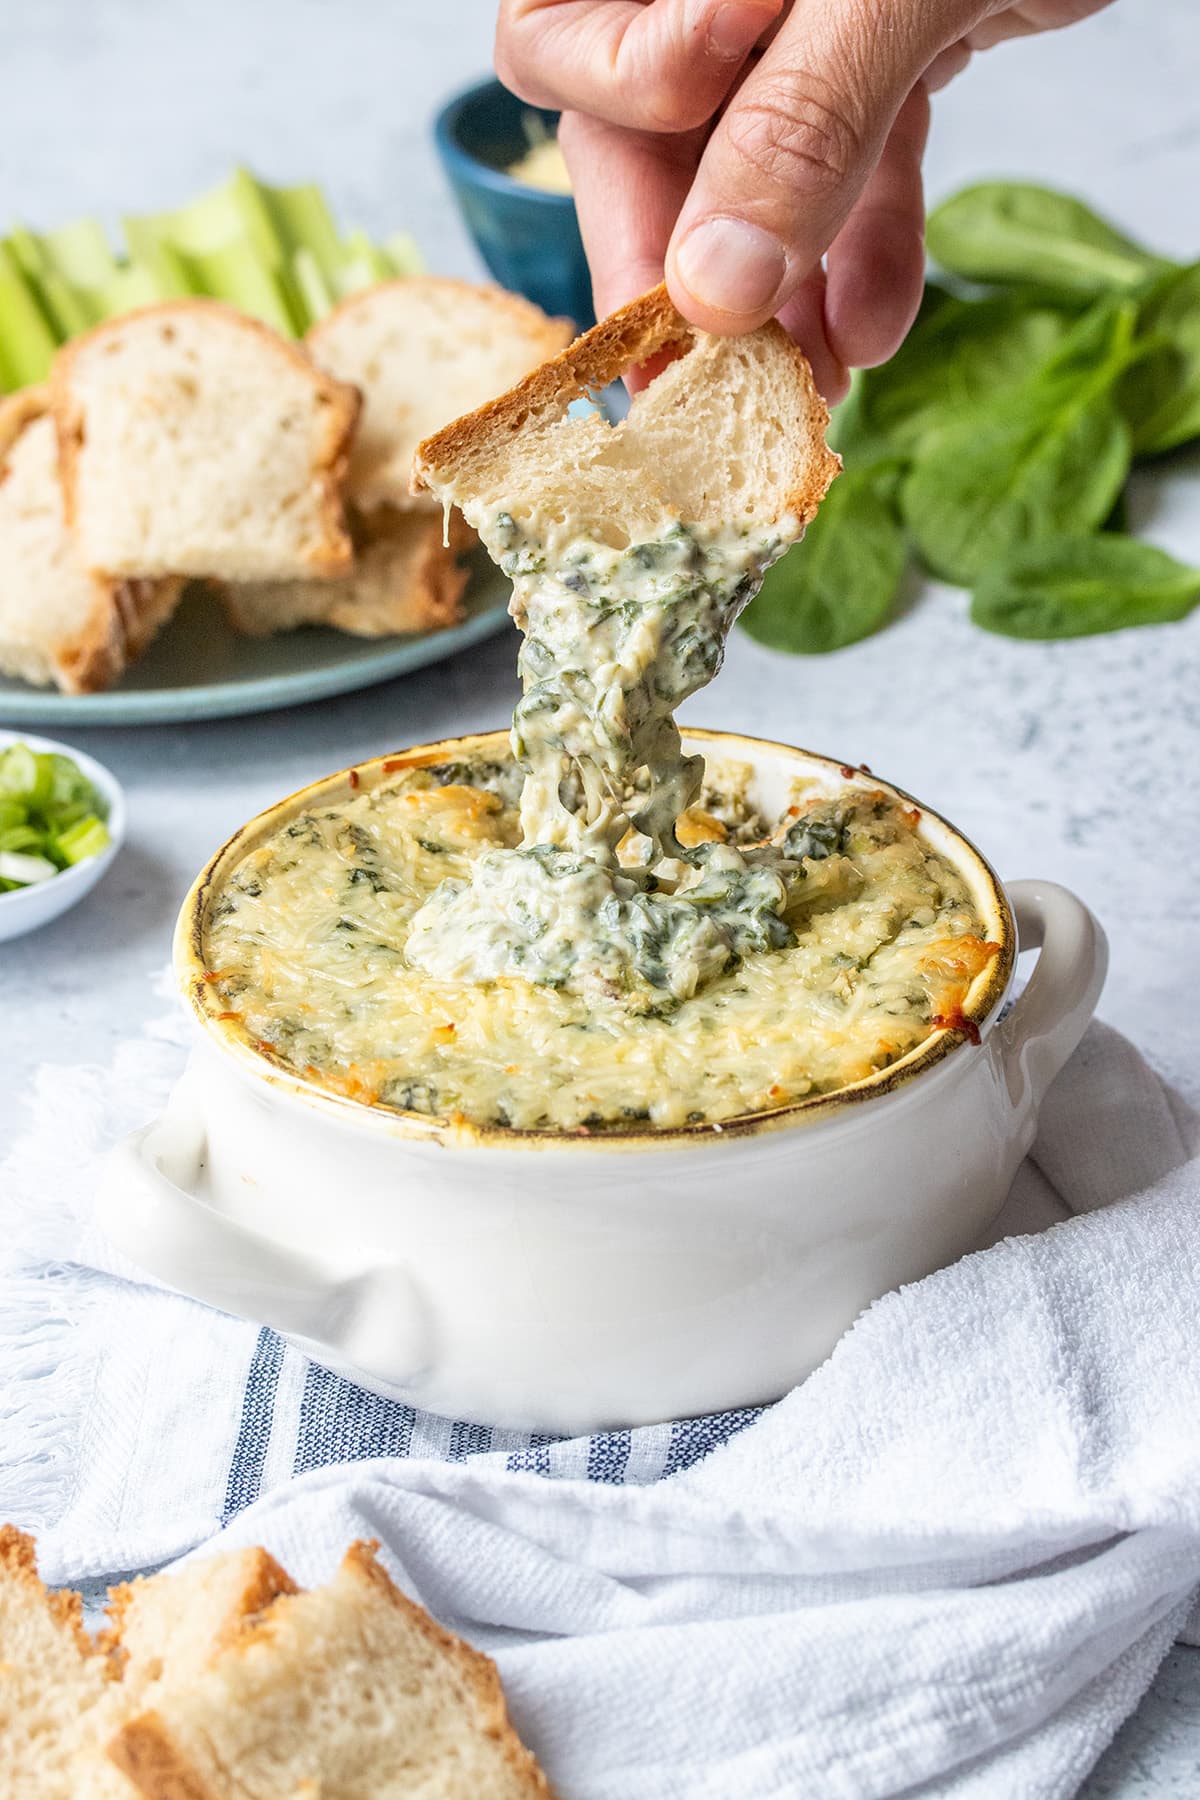 A hand dipping a piece of toasted bread into a baked spinach dip in a white casserole bowl.